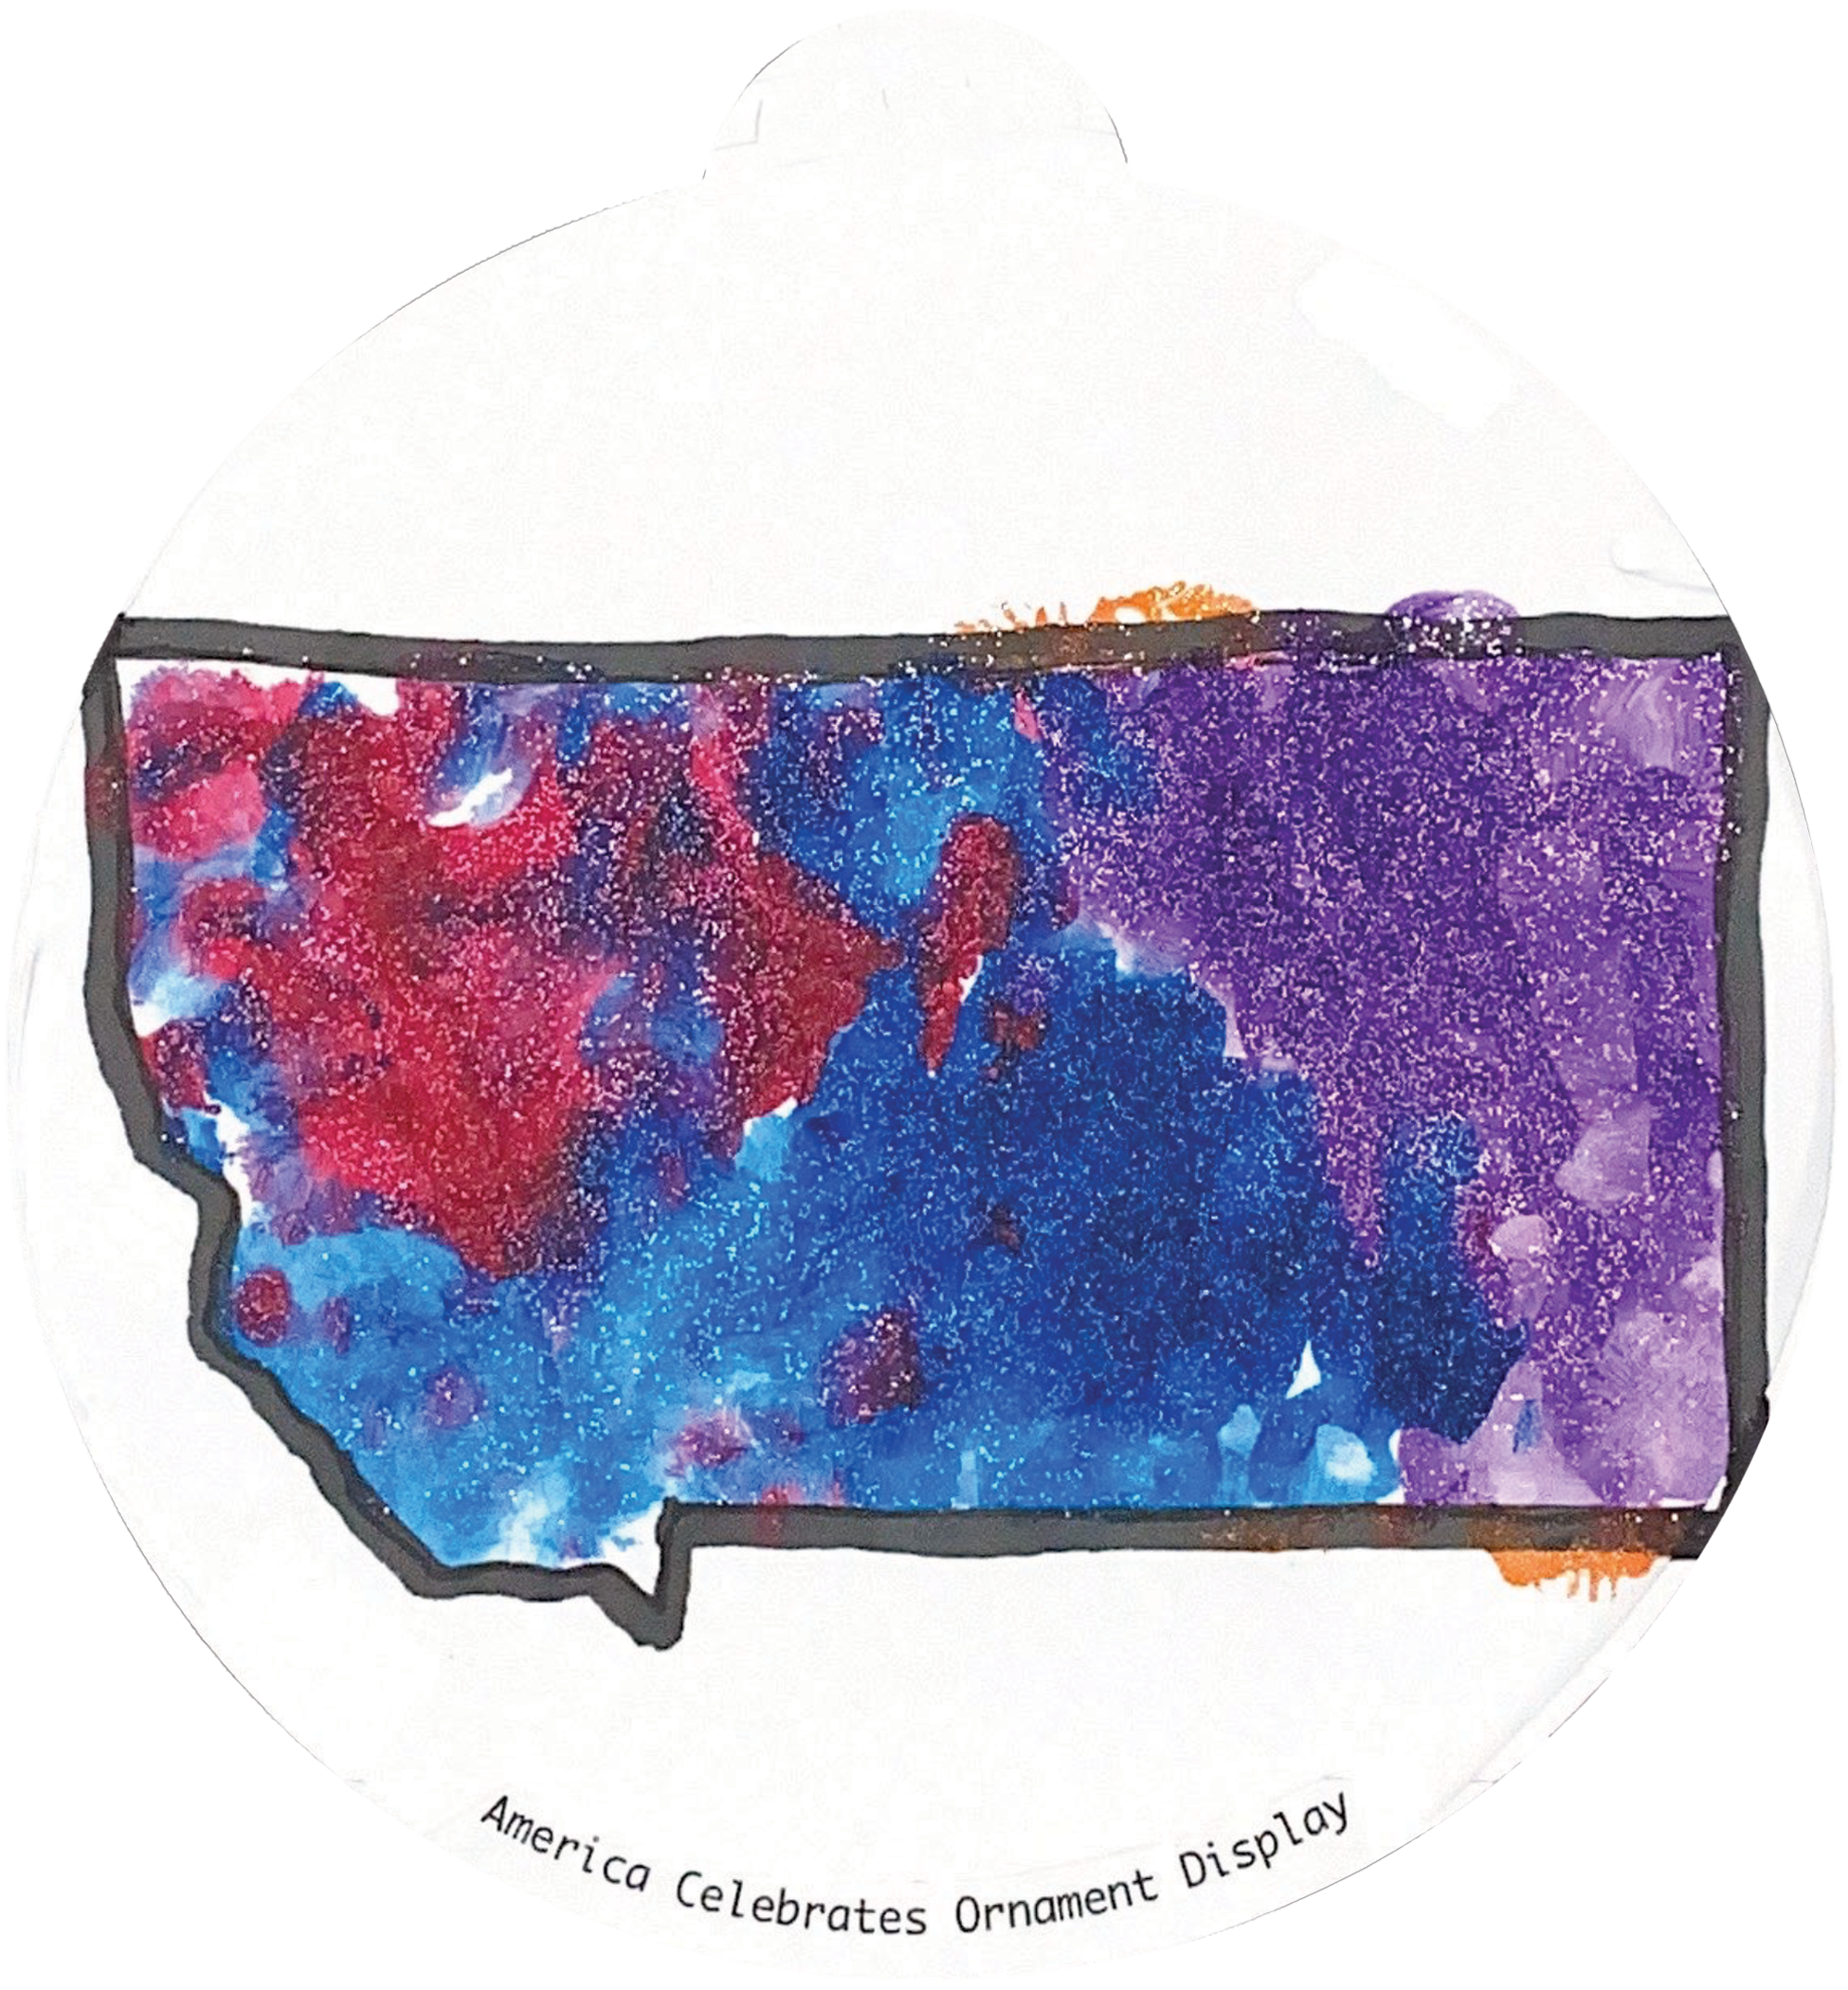 ornament depicting the outline of the state of Montana, filled in with sparkly blue, red, and purple glitter